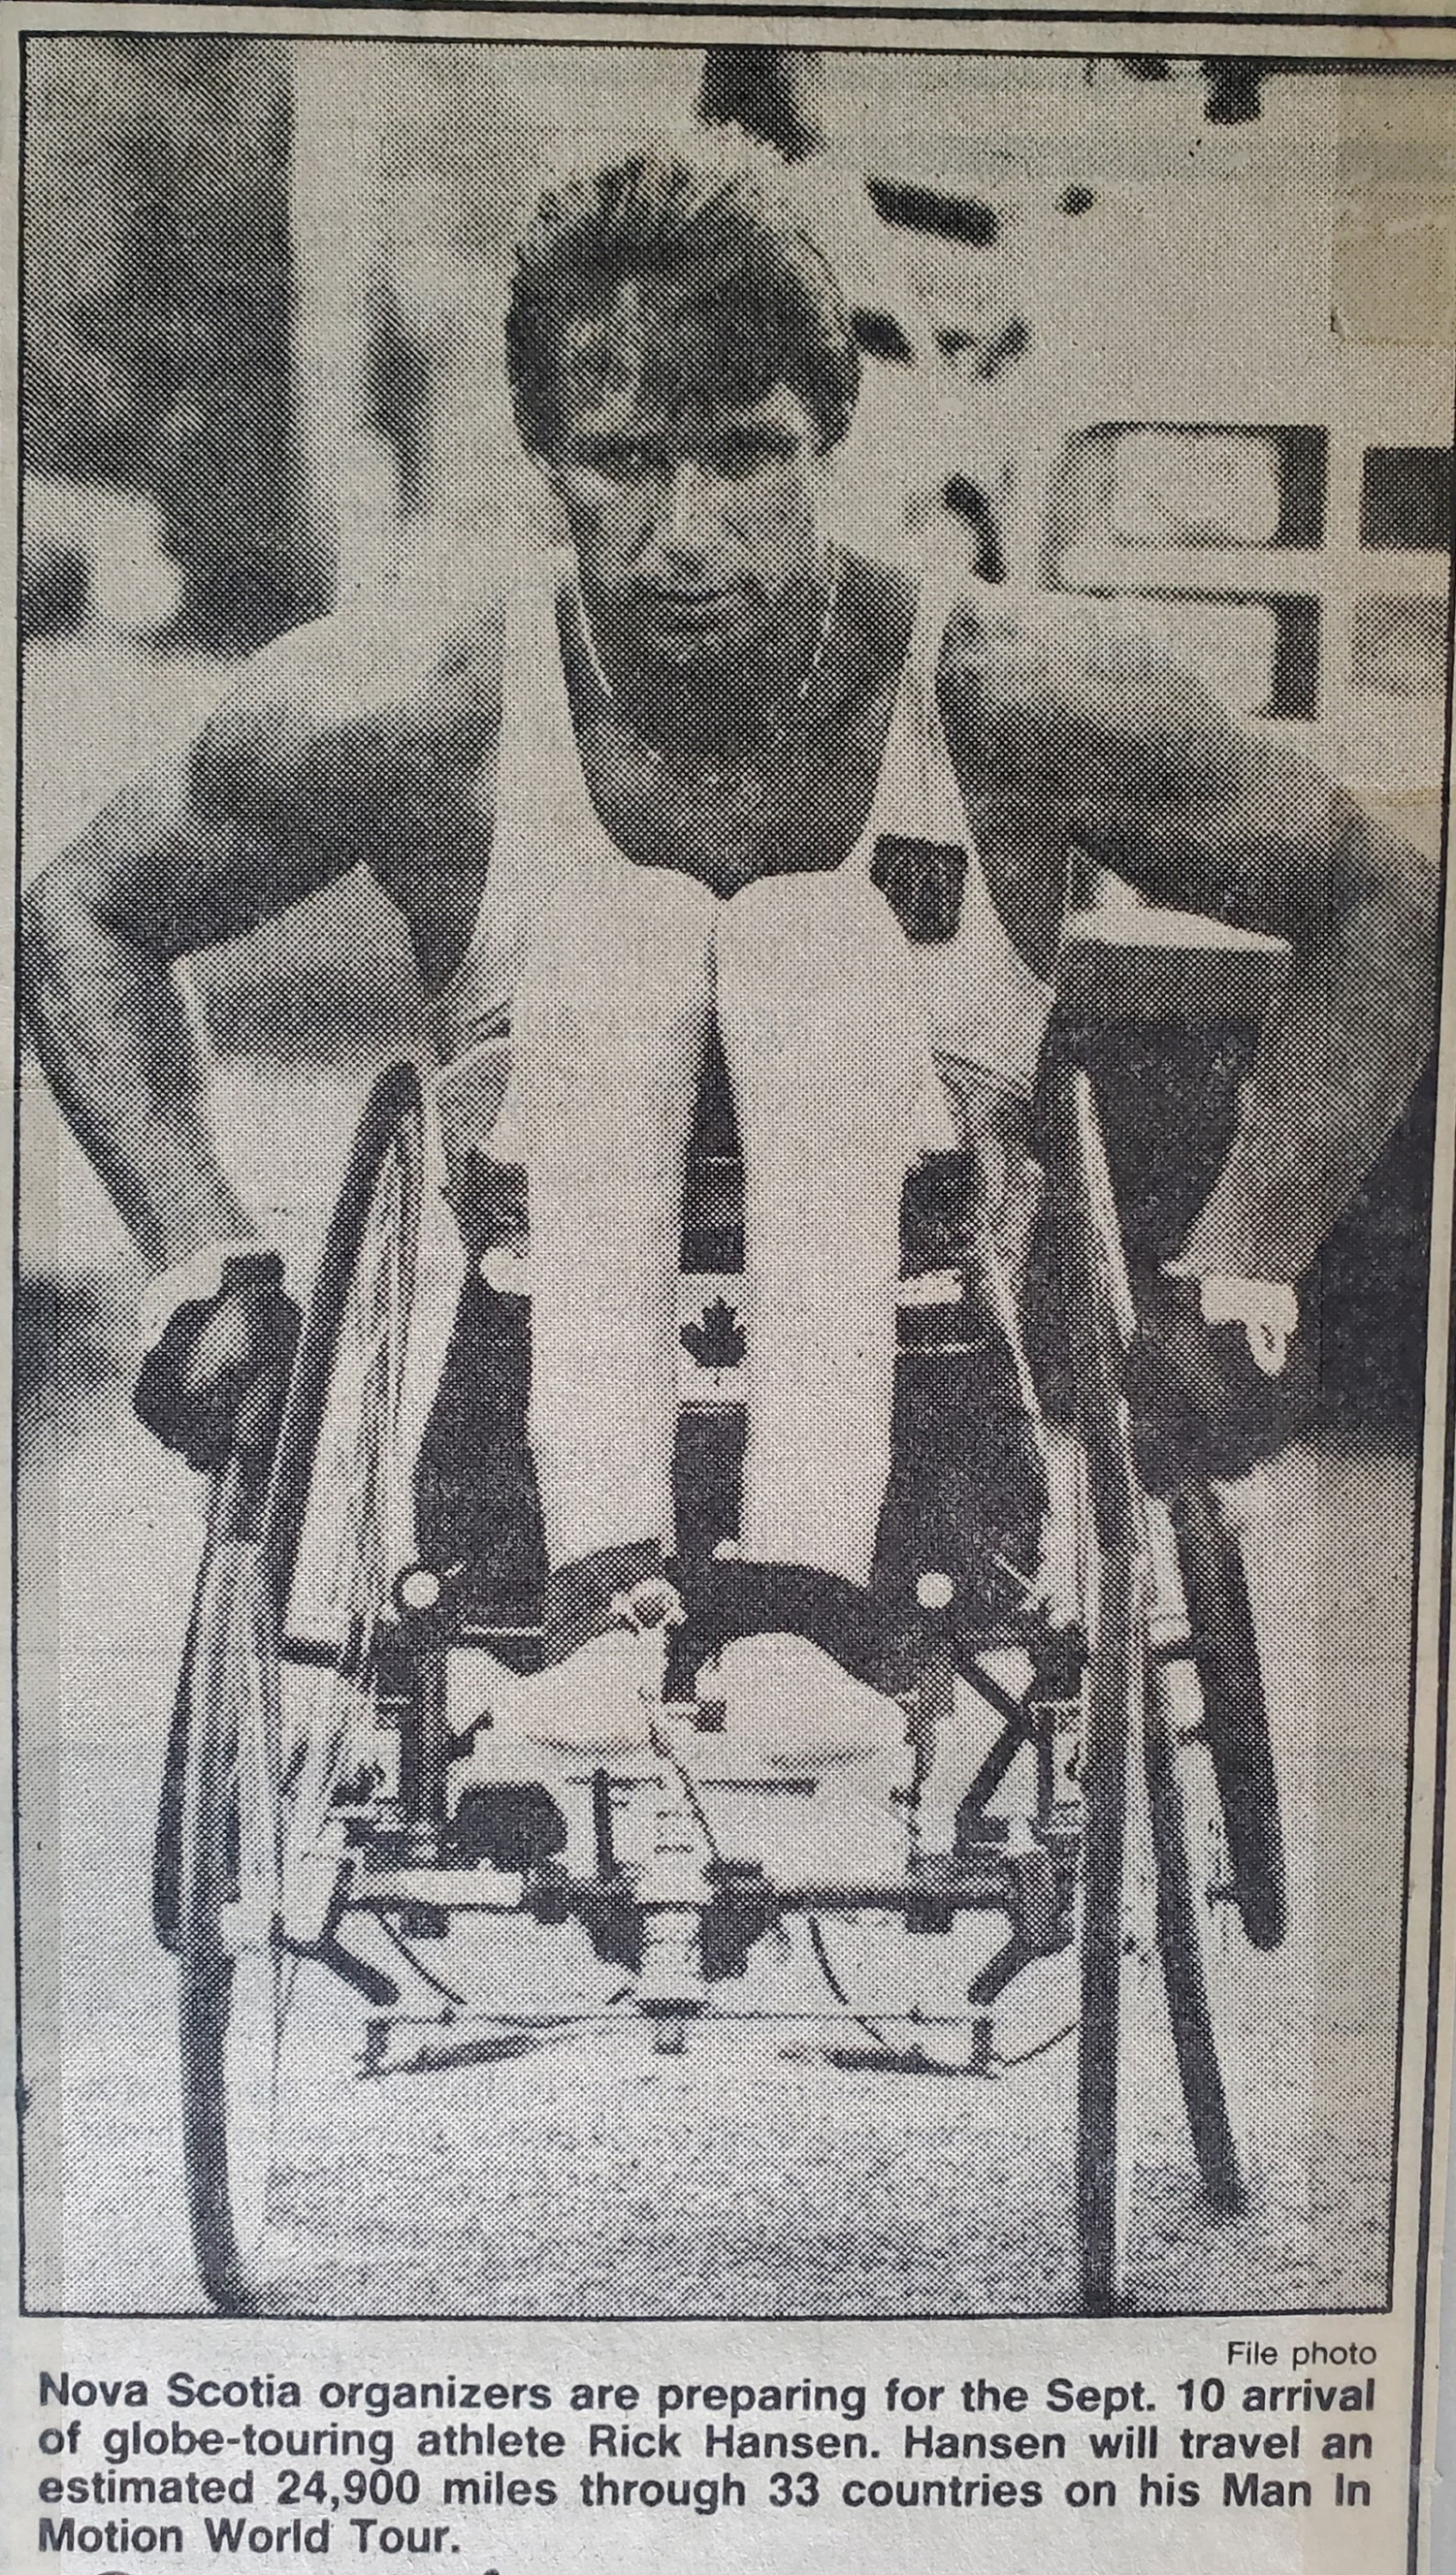 A newspaper clipping of Rick Hansen, wheeling towards the camera. Caption reads: Nova Scotia organizers are preparing for the Sept. 10 arrival of globe-touring athlete Rick Hansen. Hansen will travel an estimated 24,900 miles through 33 countries on his Man in Motion World Tour.